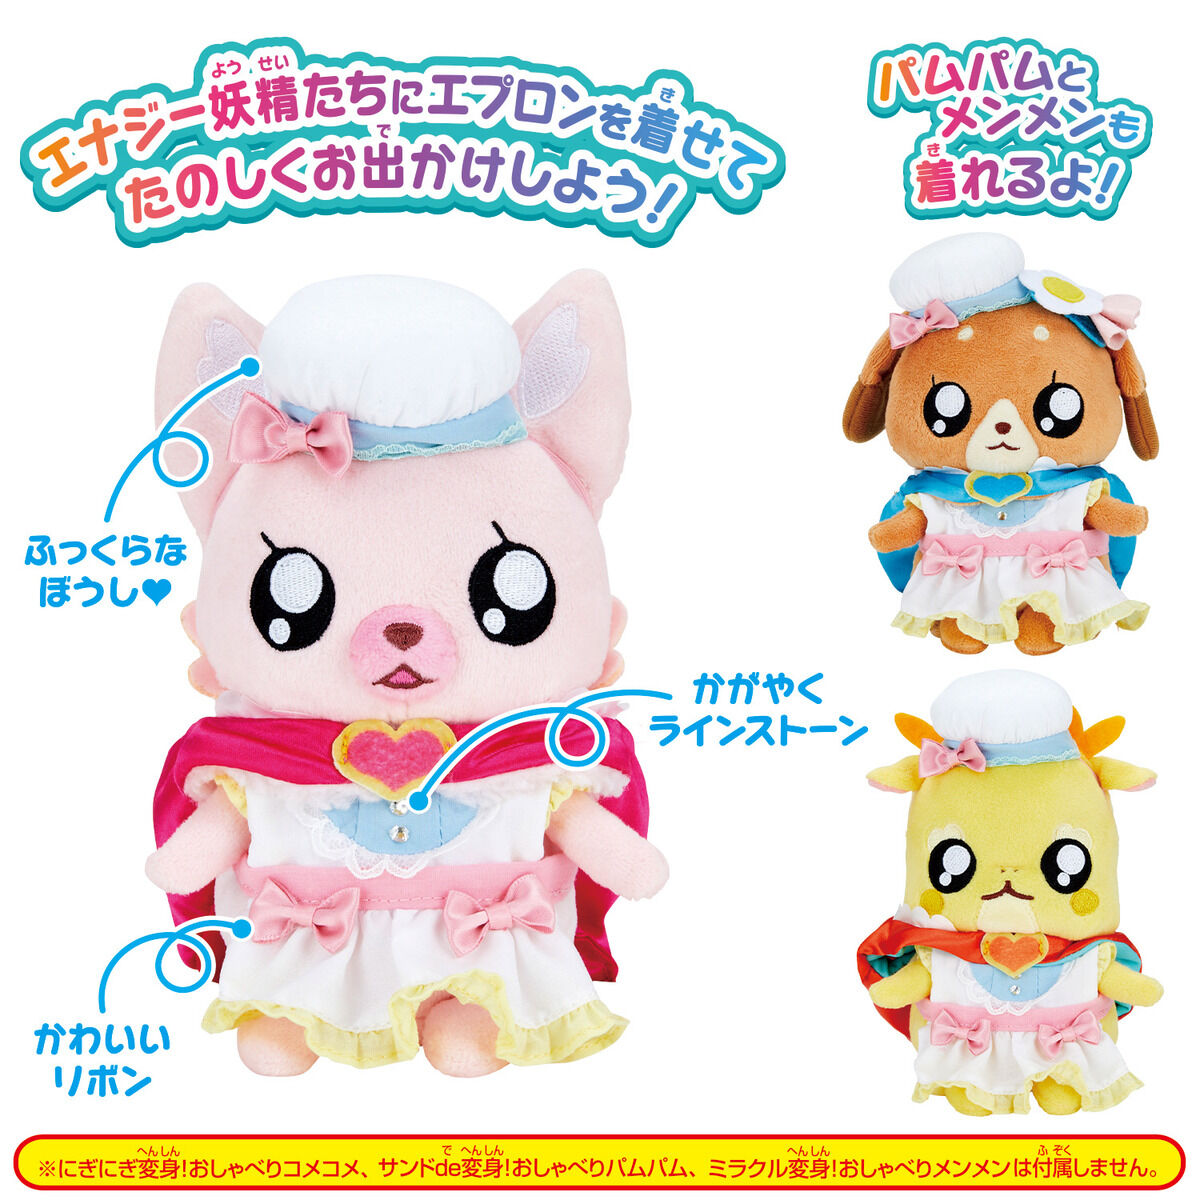 Precure Miracle Change! Plush Cooking Apron Outfit